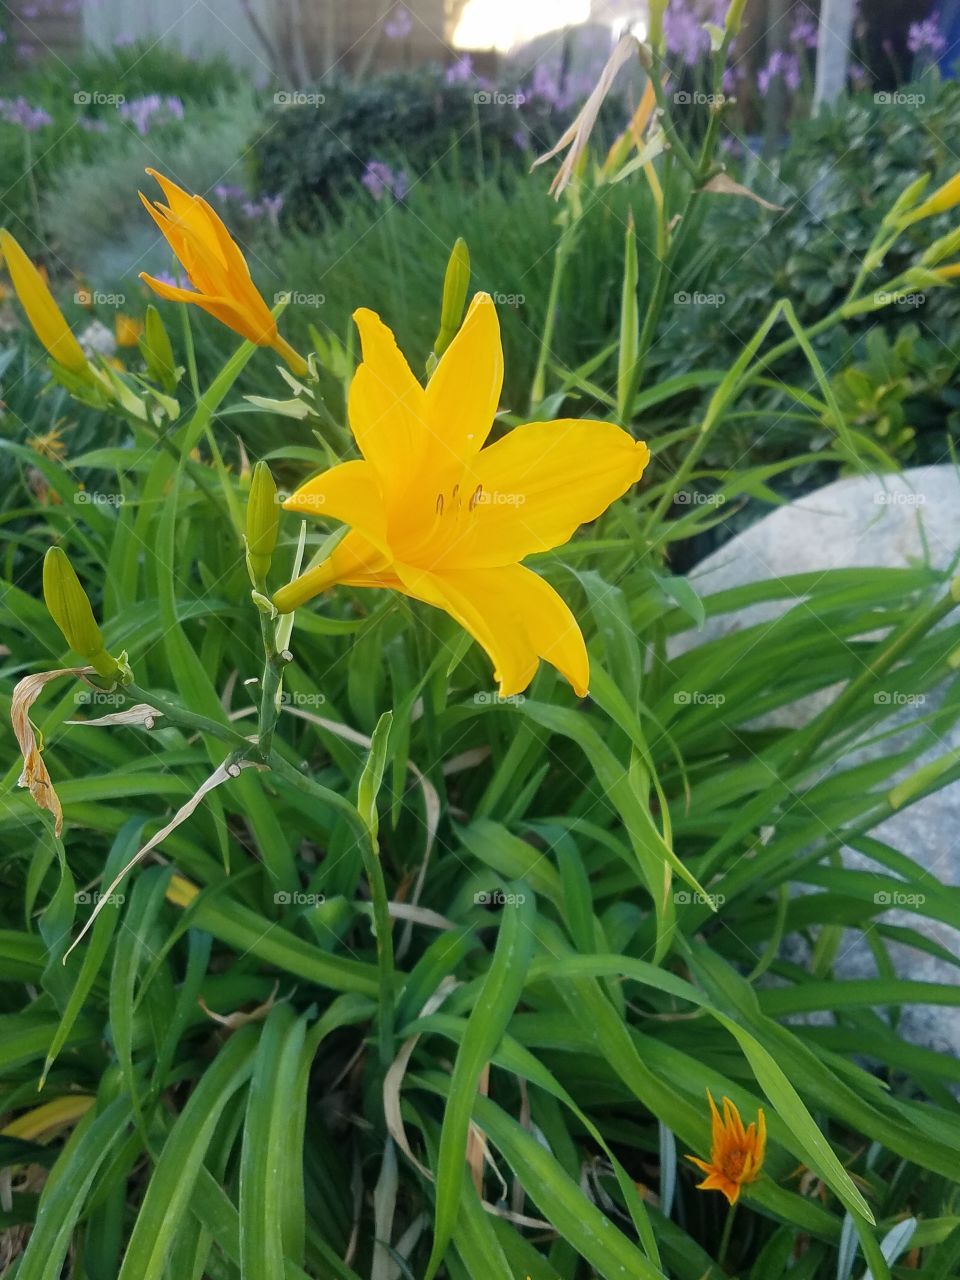 it's early evening when these pretty yellow flowers start closing for the night after soaking up the California sun all day.